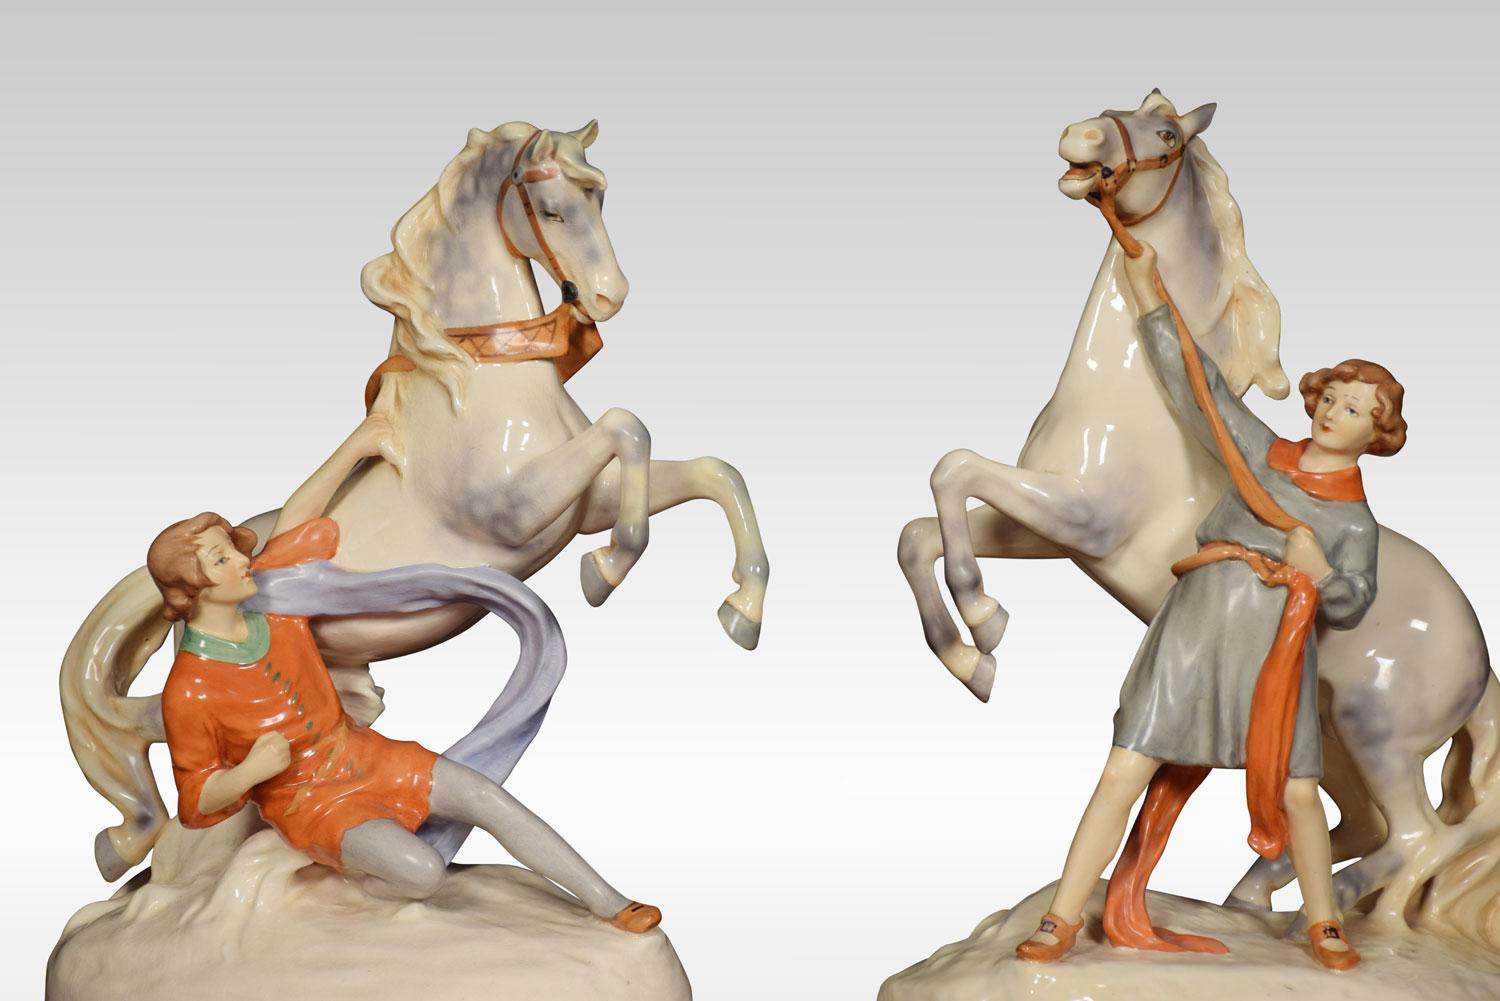 Pair of Royal Dux figure groups of young men with horses, modelled rearing with accompanying stabile hand, on oval bases. Underglaze mark to bases.
Dimensions:
Height 19 inches
Width 14.5 inches
Depth 8 inches.